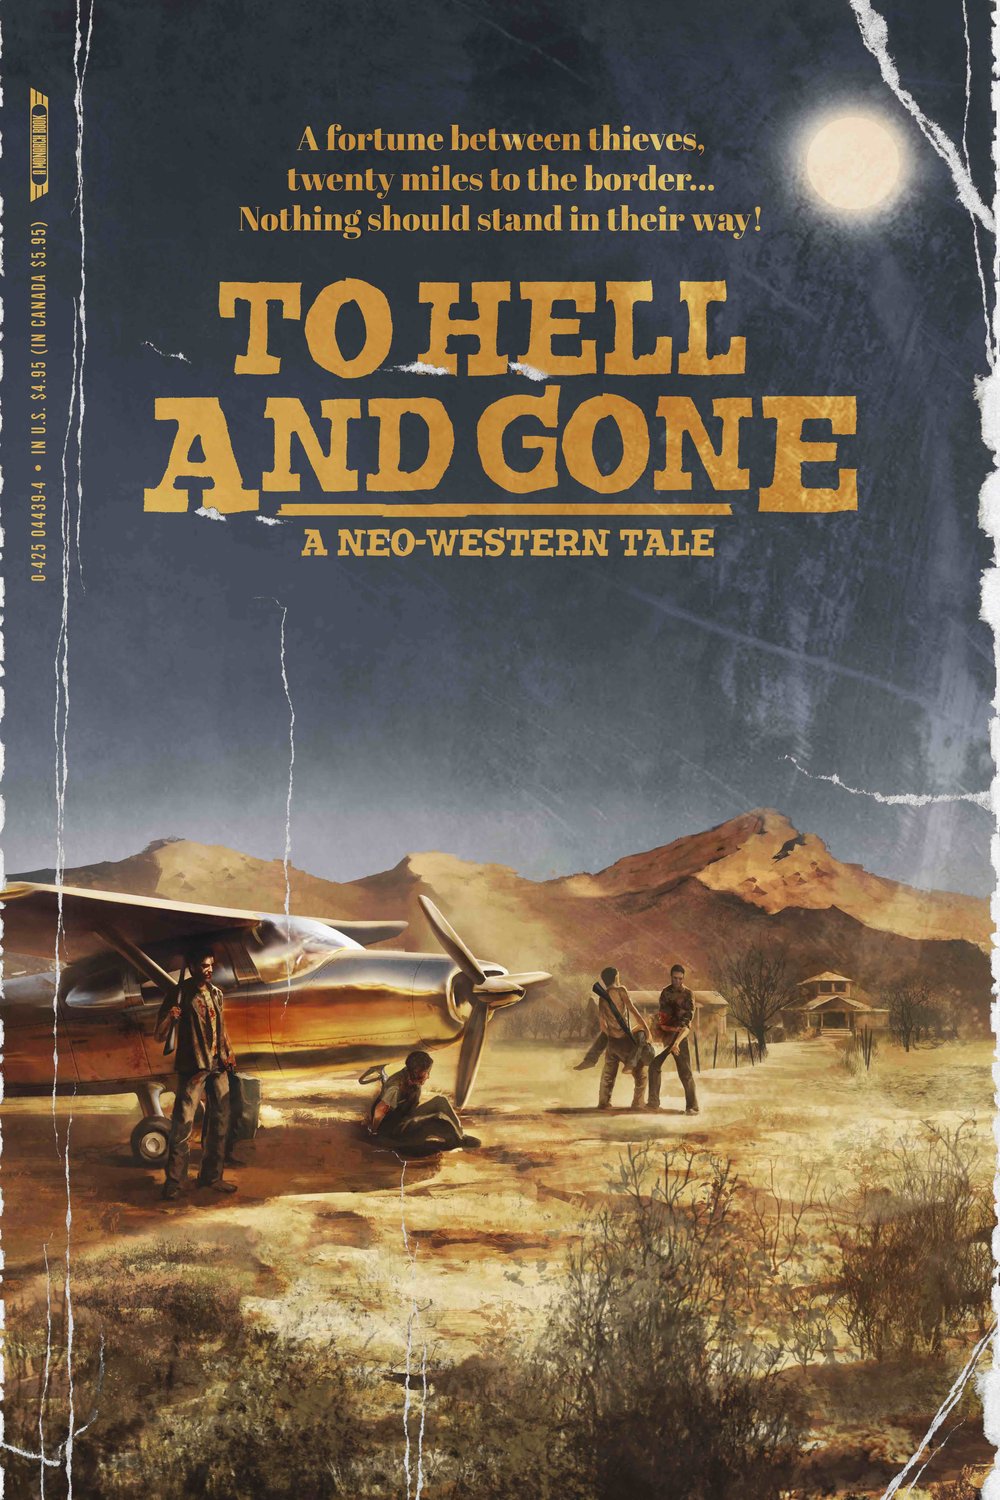 Poster of the movie To Hell and Gone